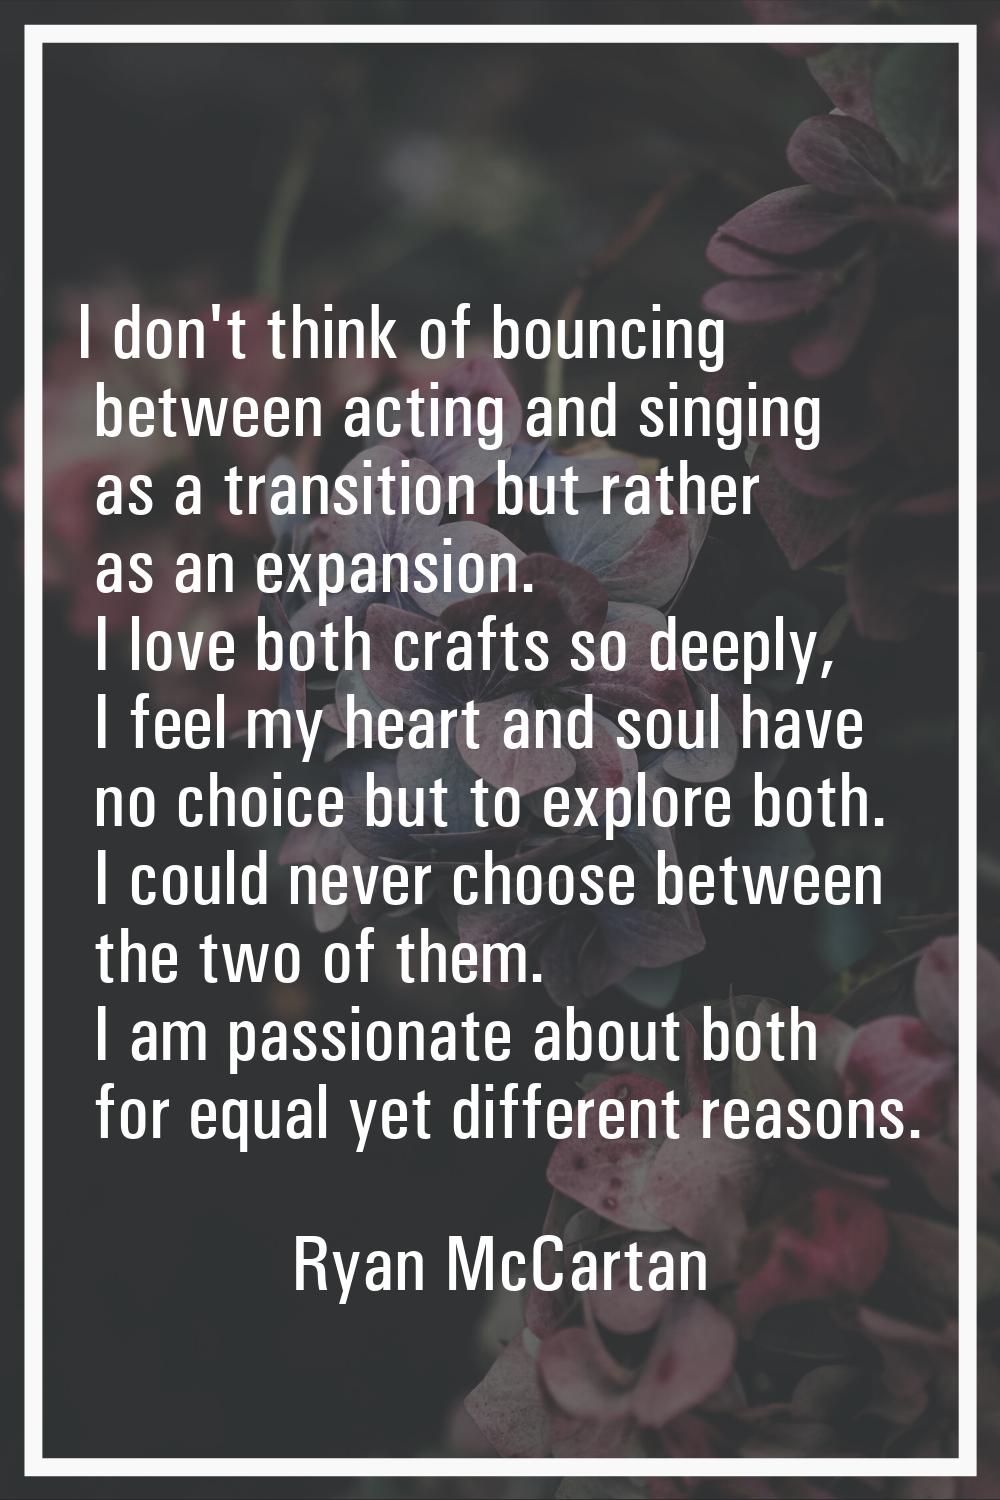 I don't think of bouncing between acting and singing as a transition but rather as an expansion. I 